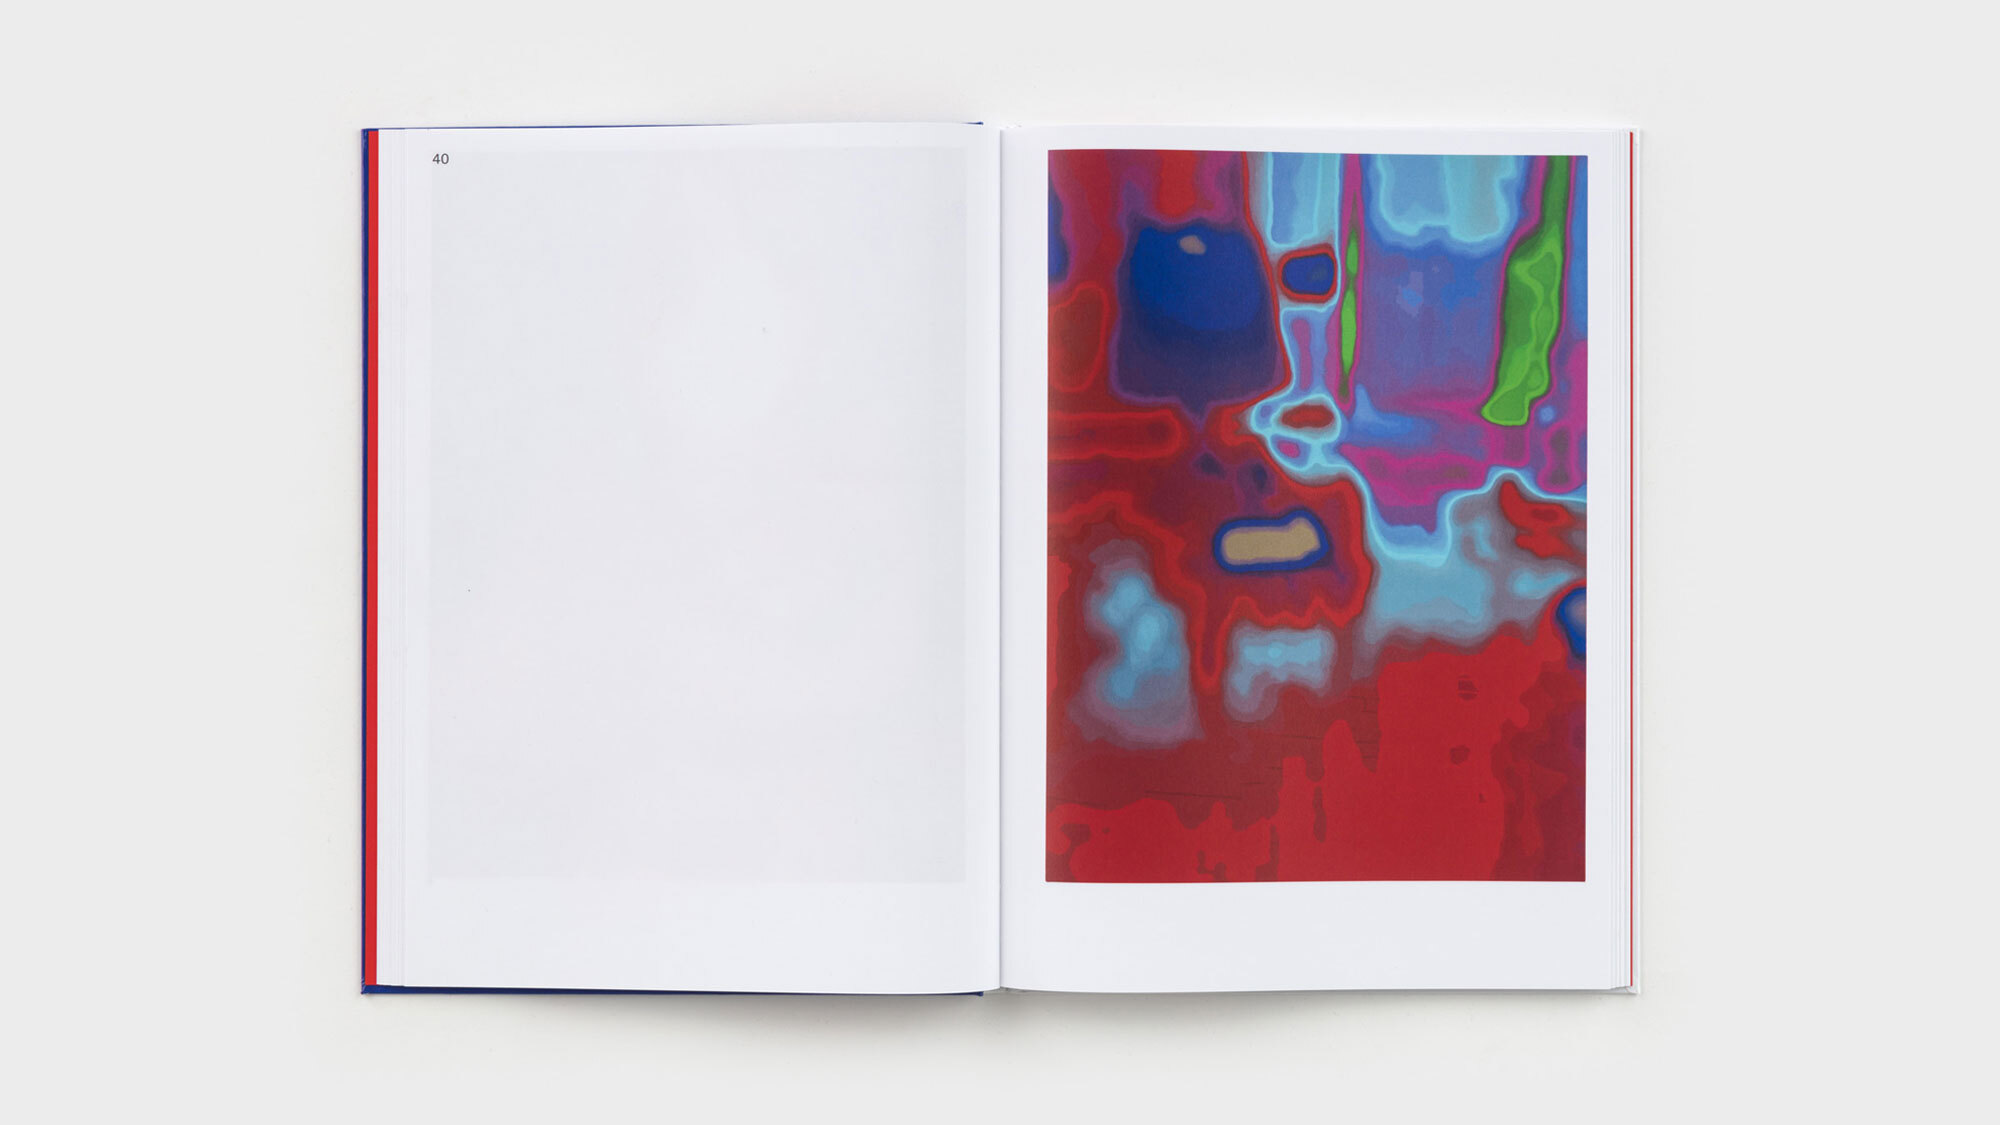 A spread of pages 40 and 41. 40 is blank, with only the page number in the upper left corner. 41 contains a thermal-image painting bounded by white-space. It contains amorphous cells of teal, navy, orange, green, and red.